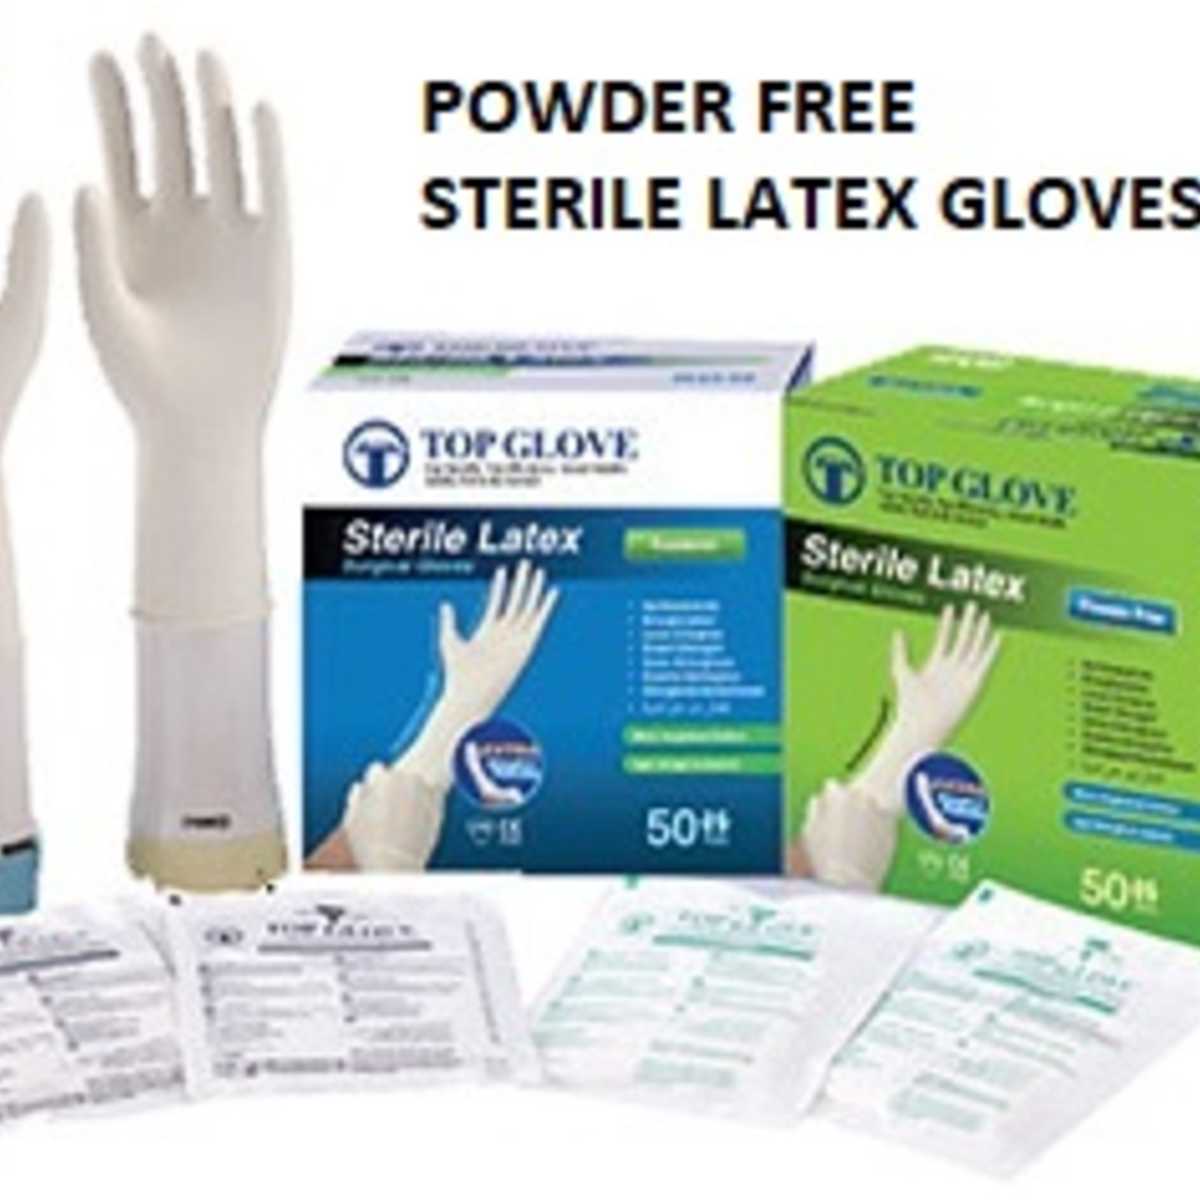 7.5 Sterile Latex Surgical Glove, Powdered Free